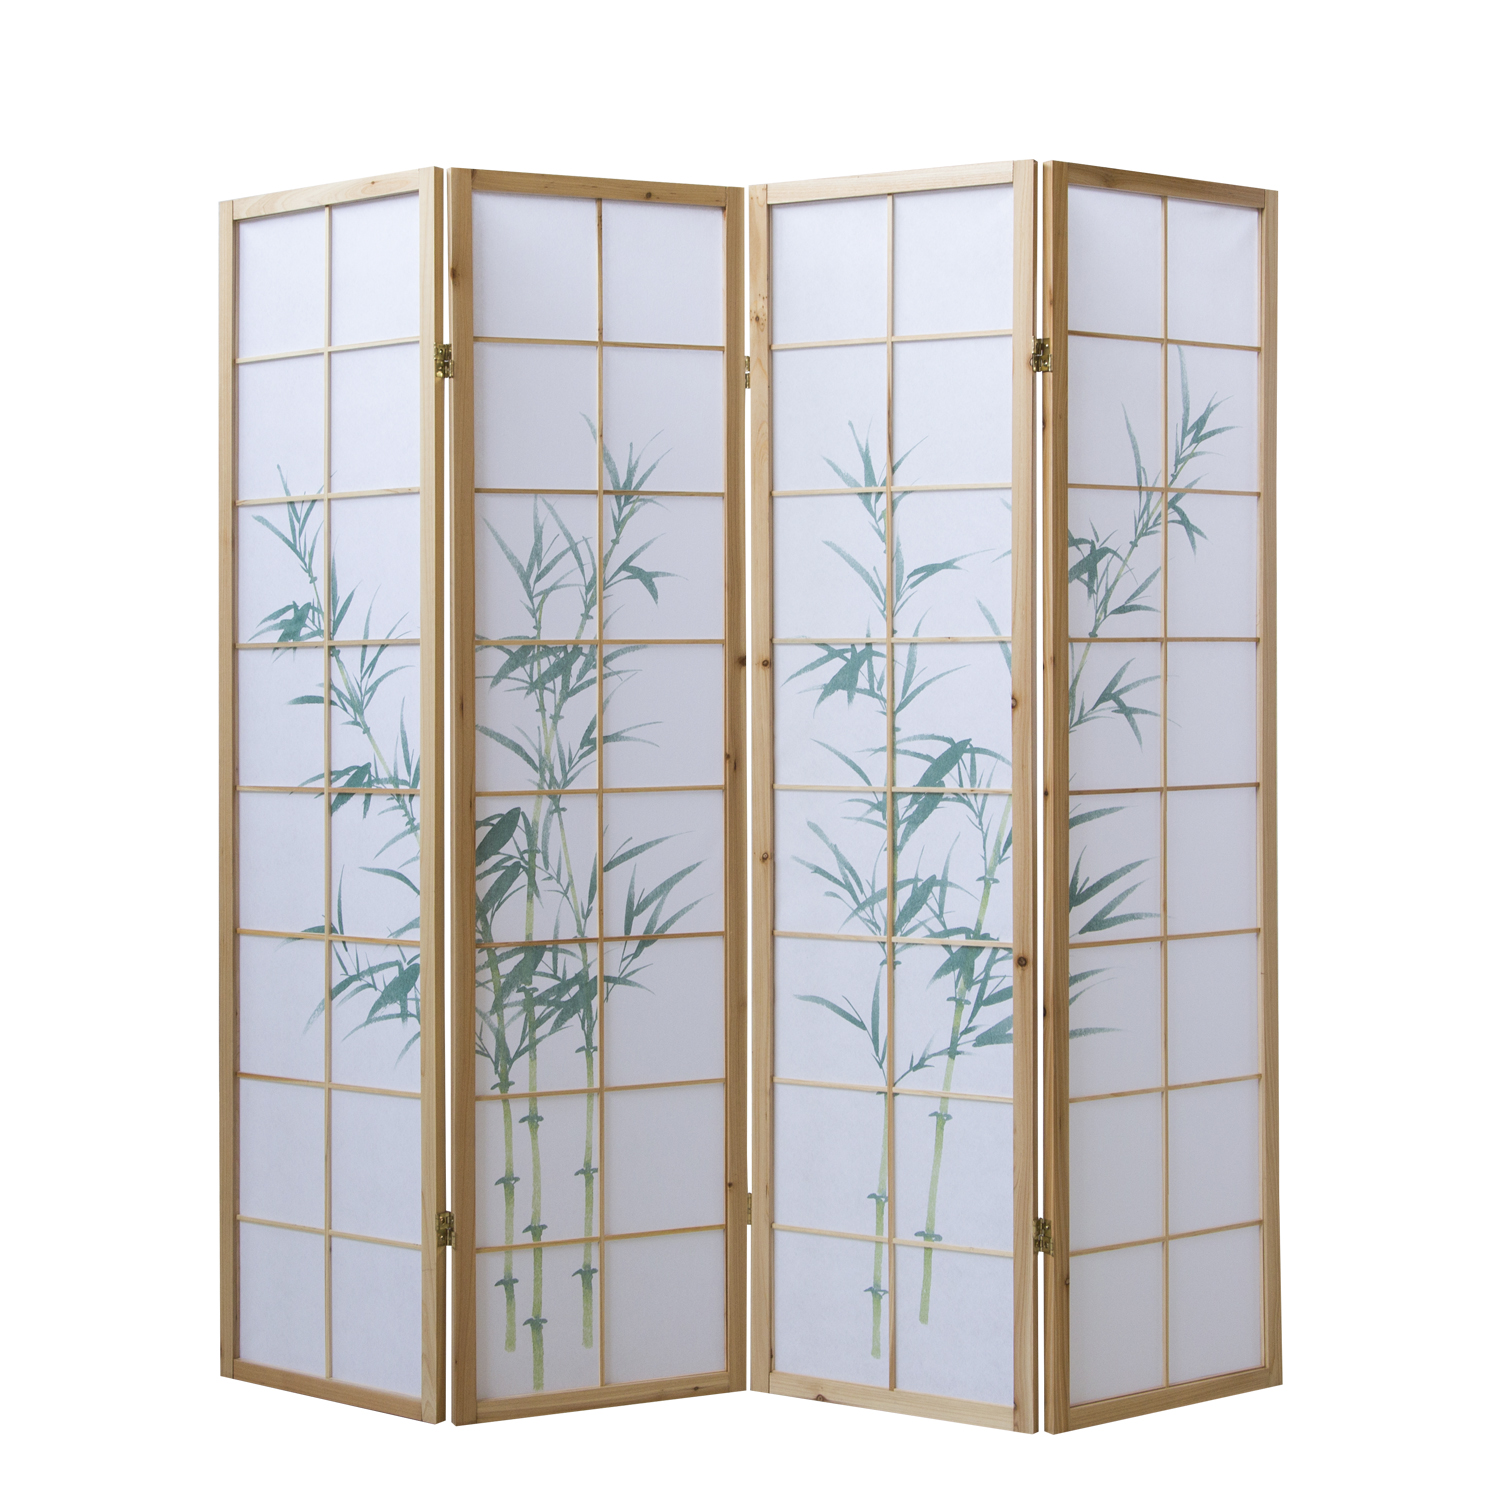 Paravent room divider 4 parts, wood natural, rice paper white, bamboo pattern, height 175 cm	